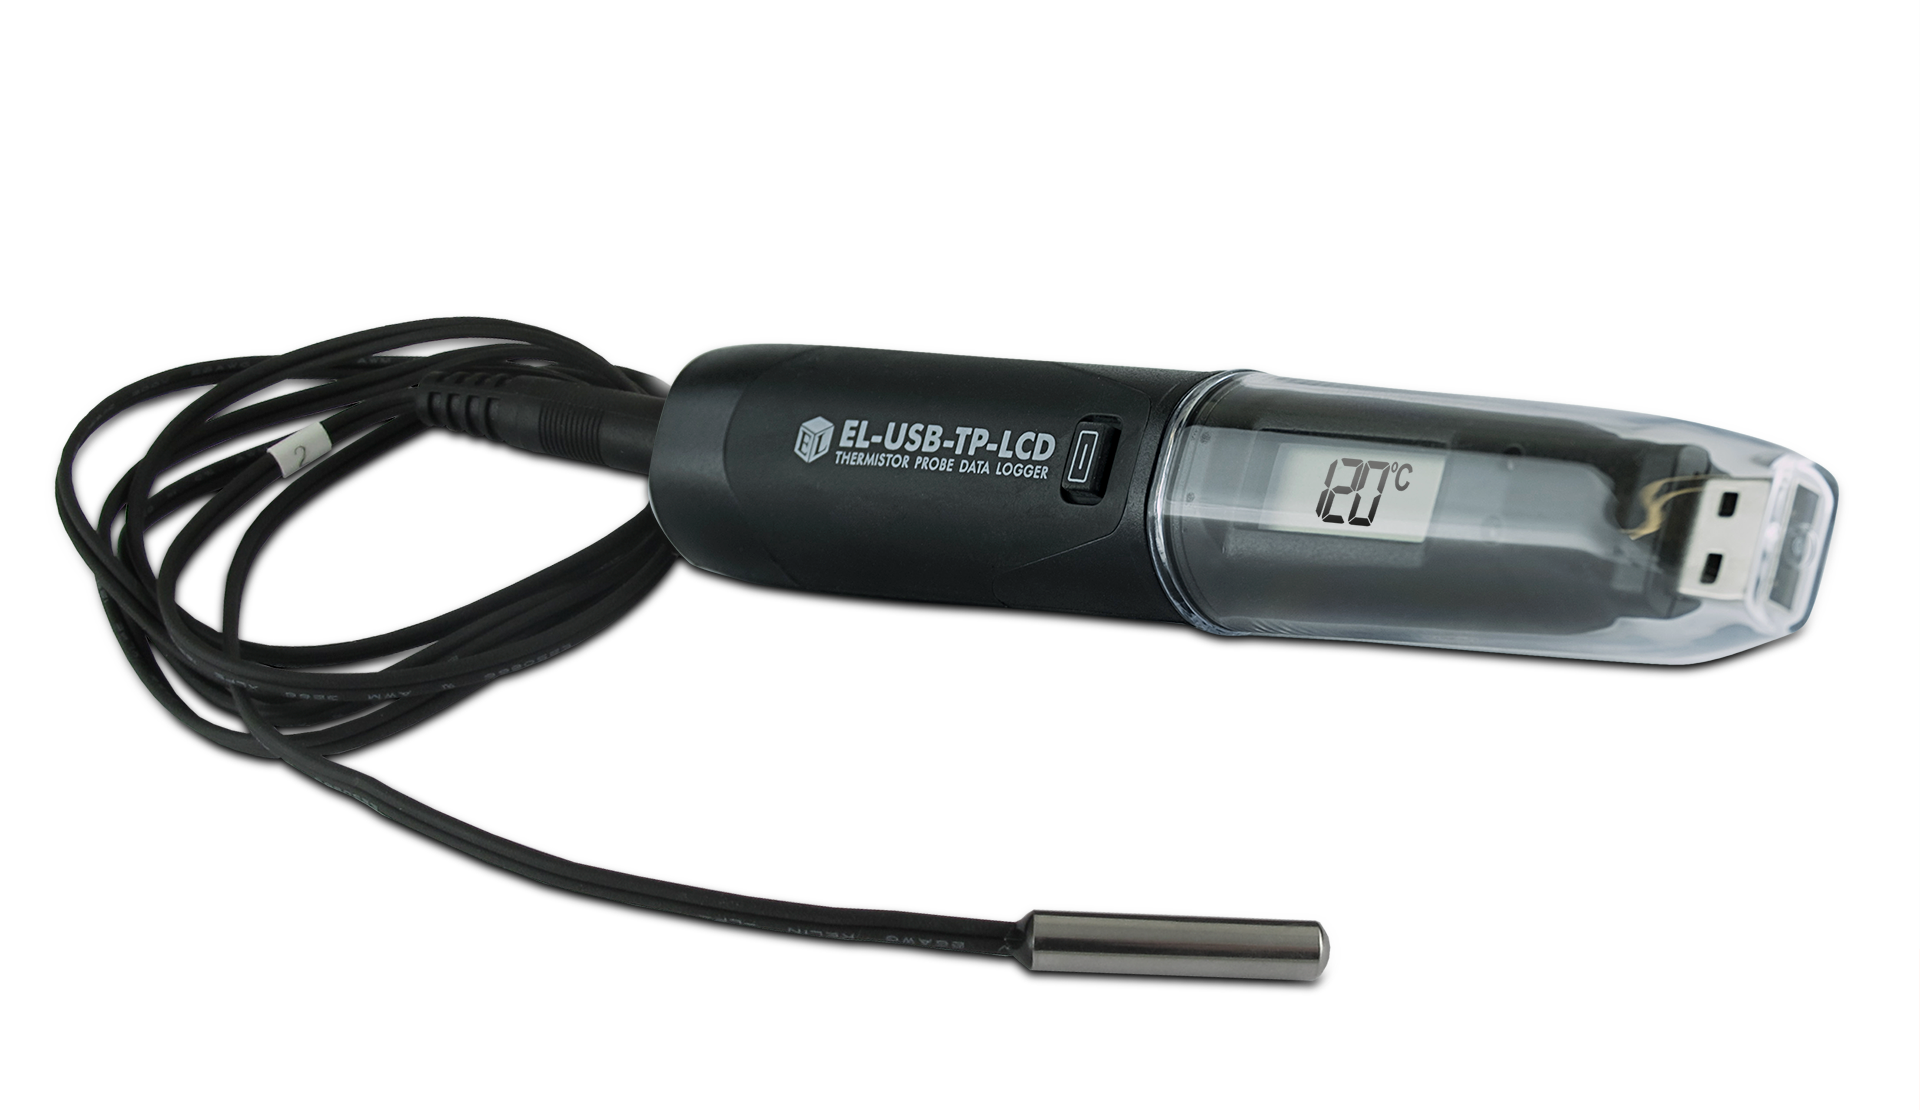 Lascar EL-USB-TP-LCD Temperature Data Logger, 1 Input Channel(s), Battery-Powered